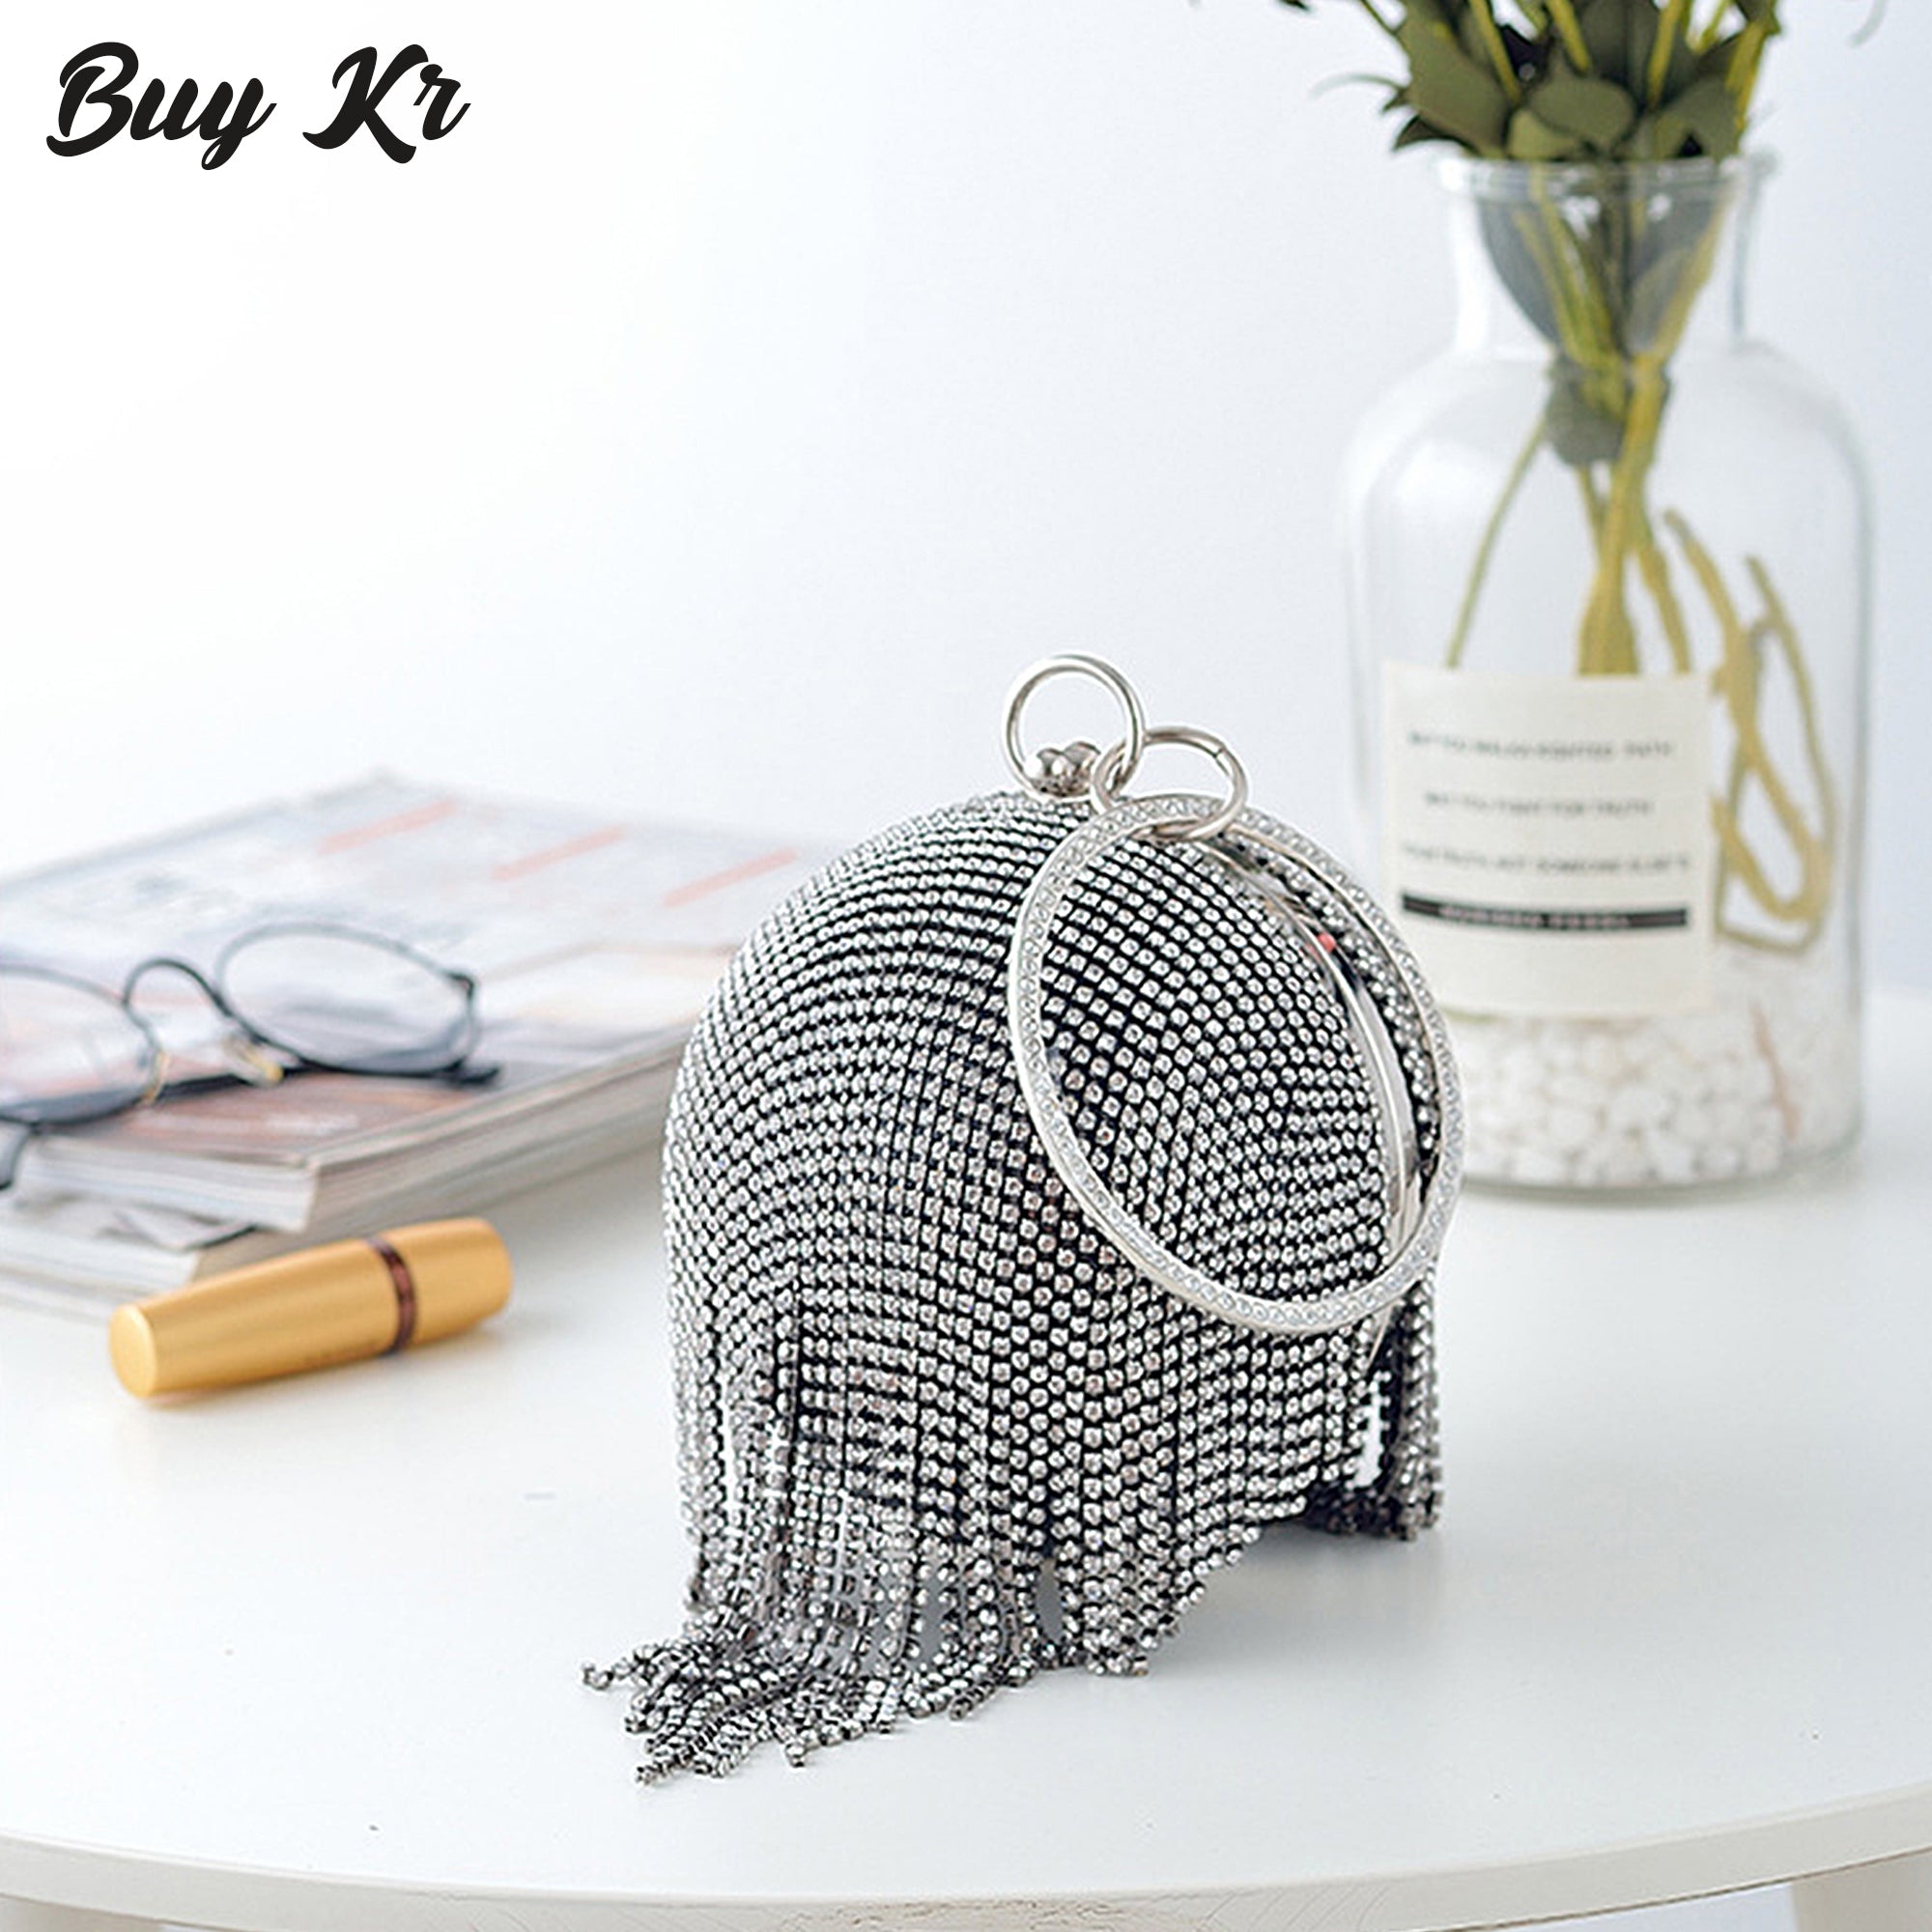 Buy Silver Ball Clutch In Metal With Mesh Design By Pink Cocktail